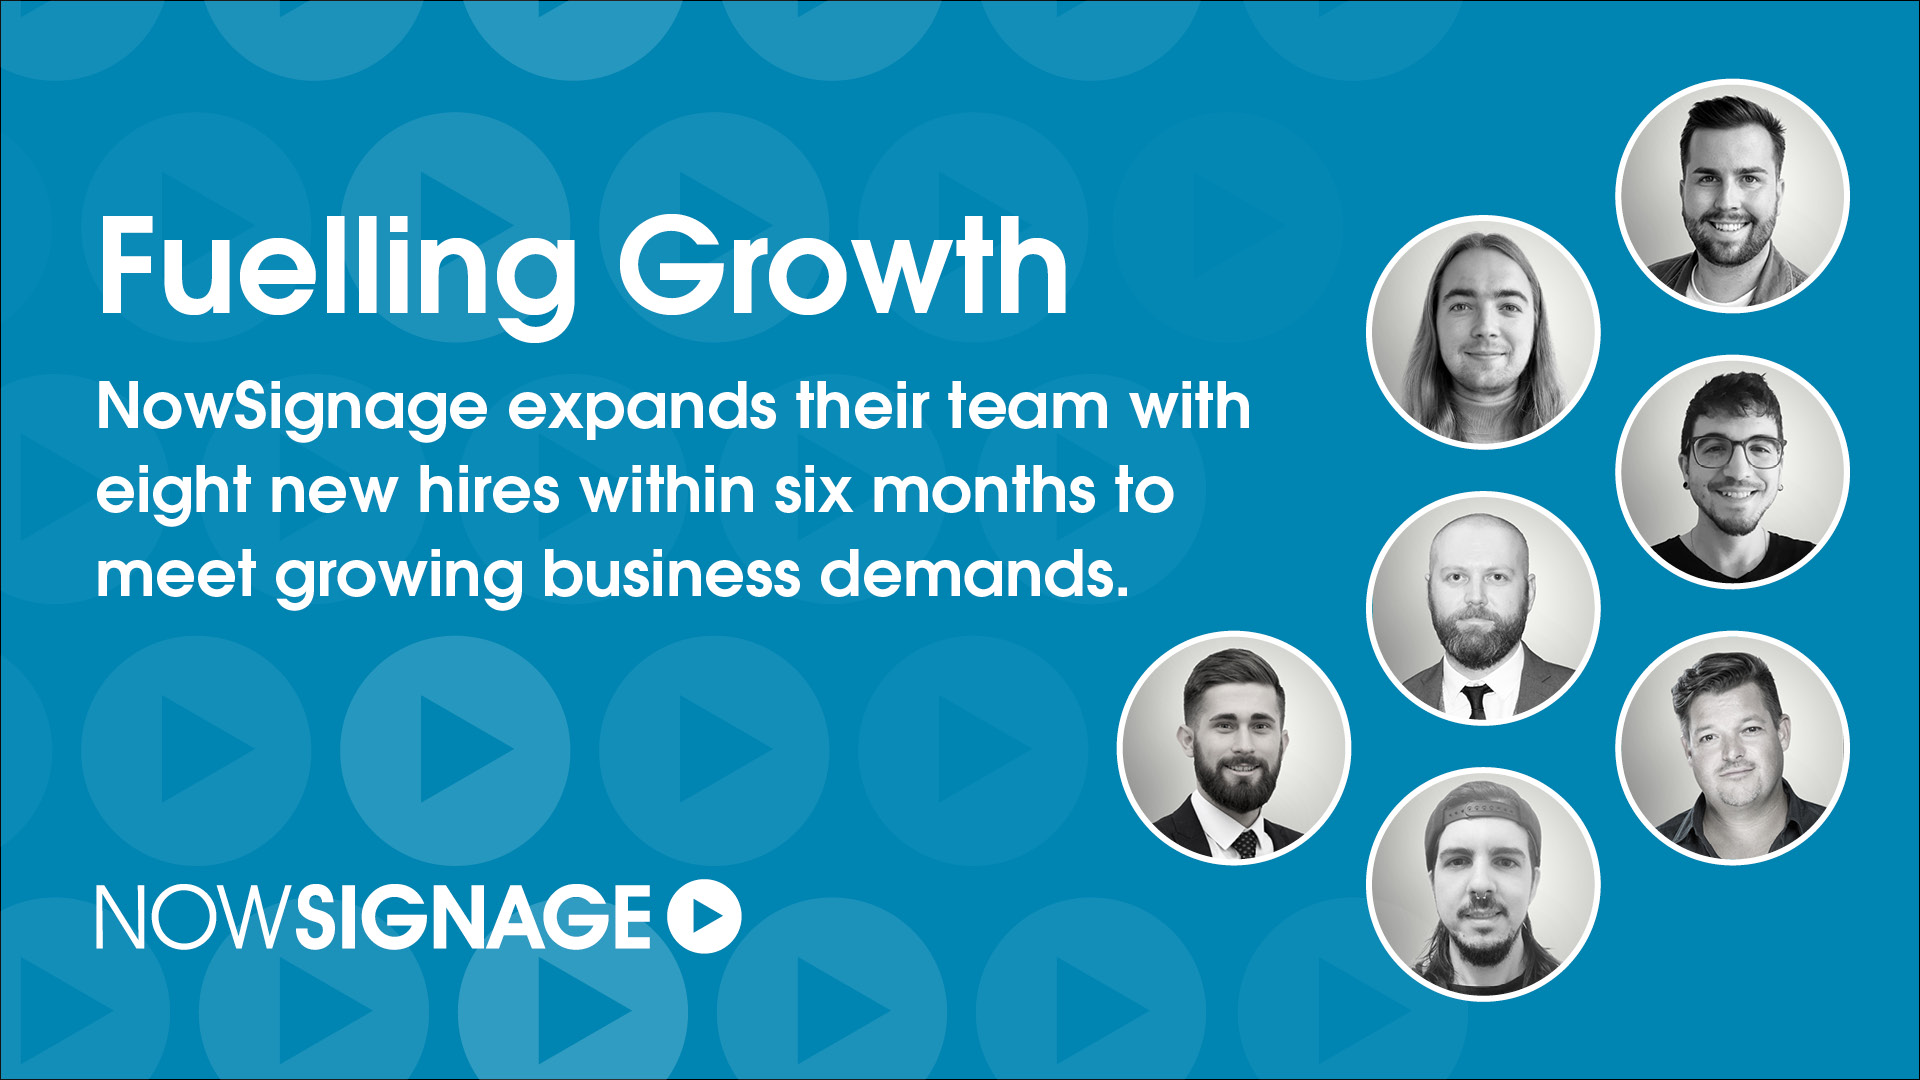 Fueling Growth: NowSignage